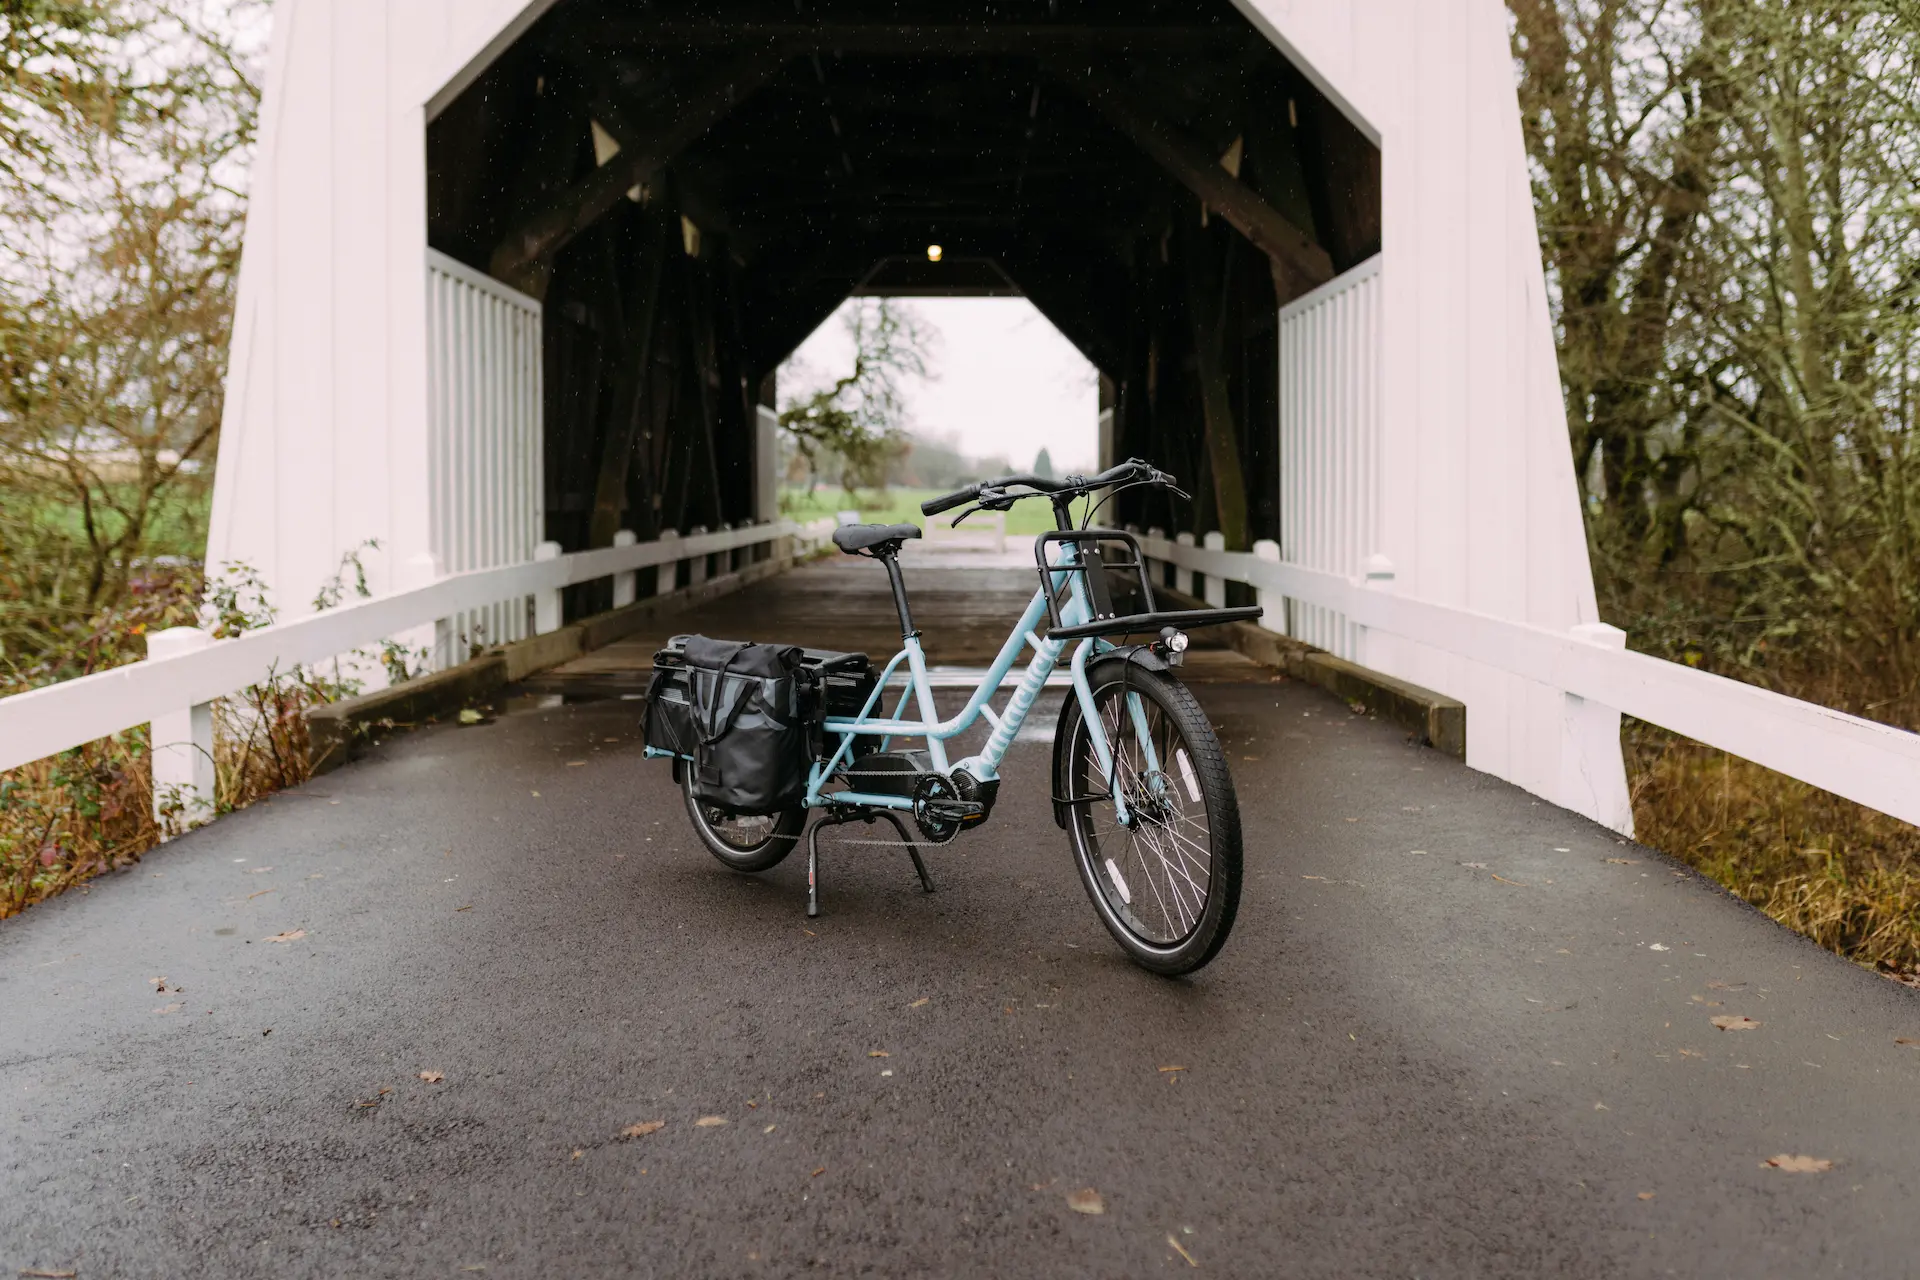 Xtracycle Swoop long-tail electric cargo bike in front of a covered bridge in the country